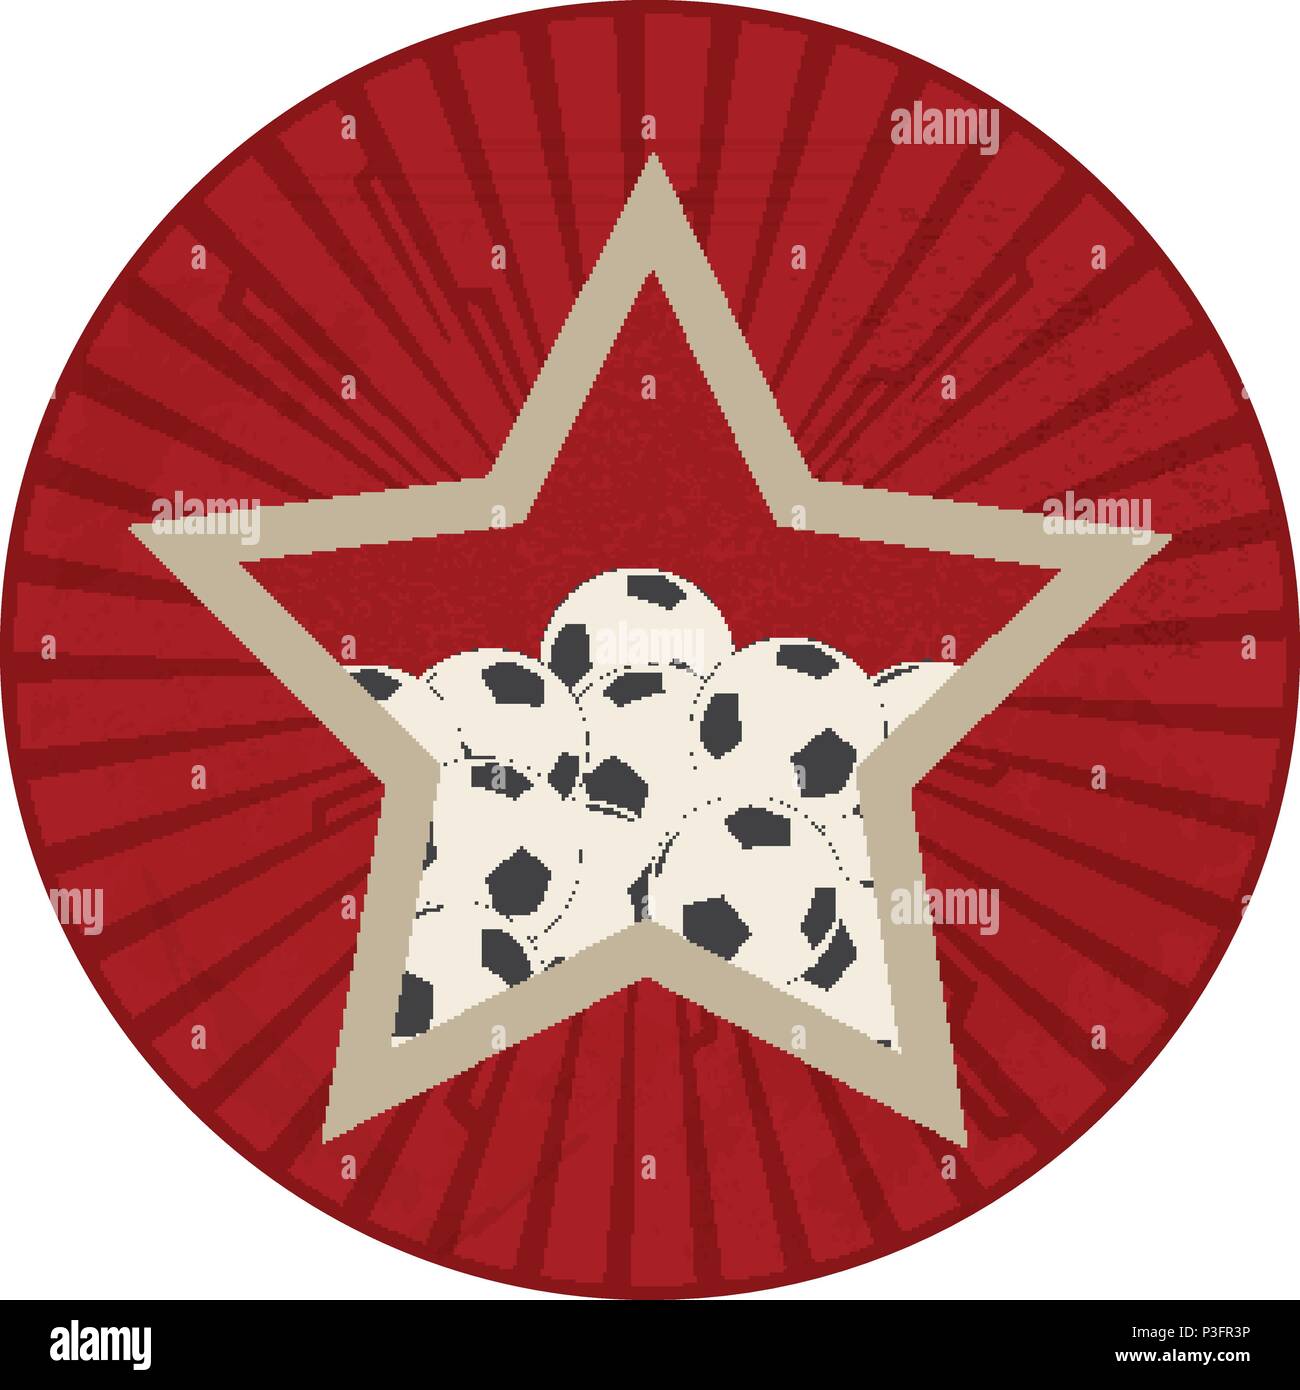 Vintage Red Circular Border with Red Star Filled with Football Soccer Balls Stock Vector